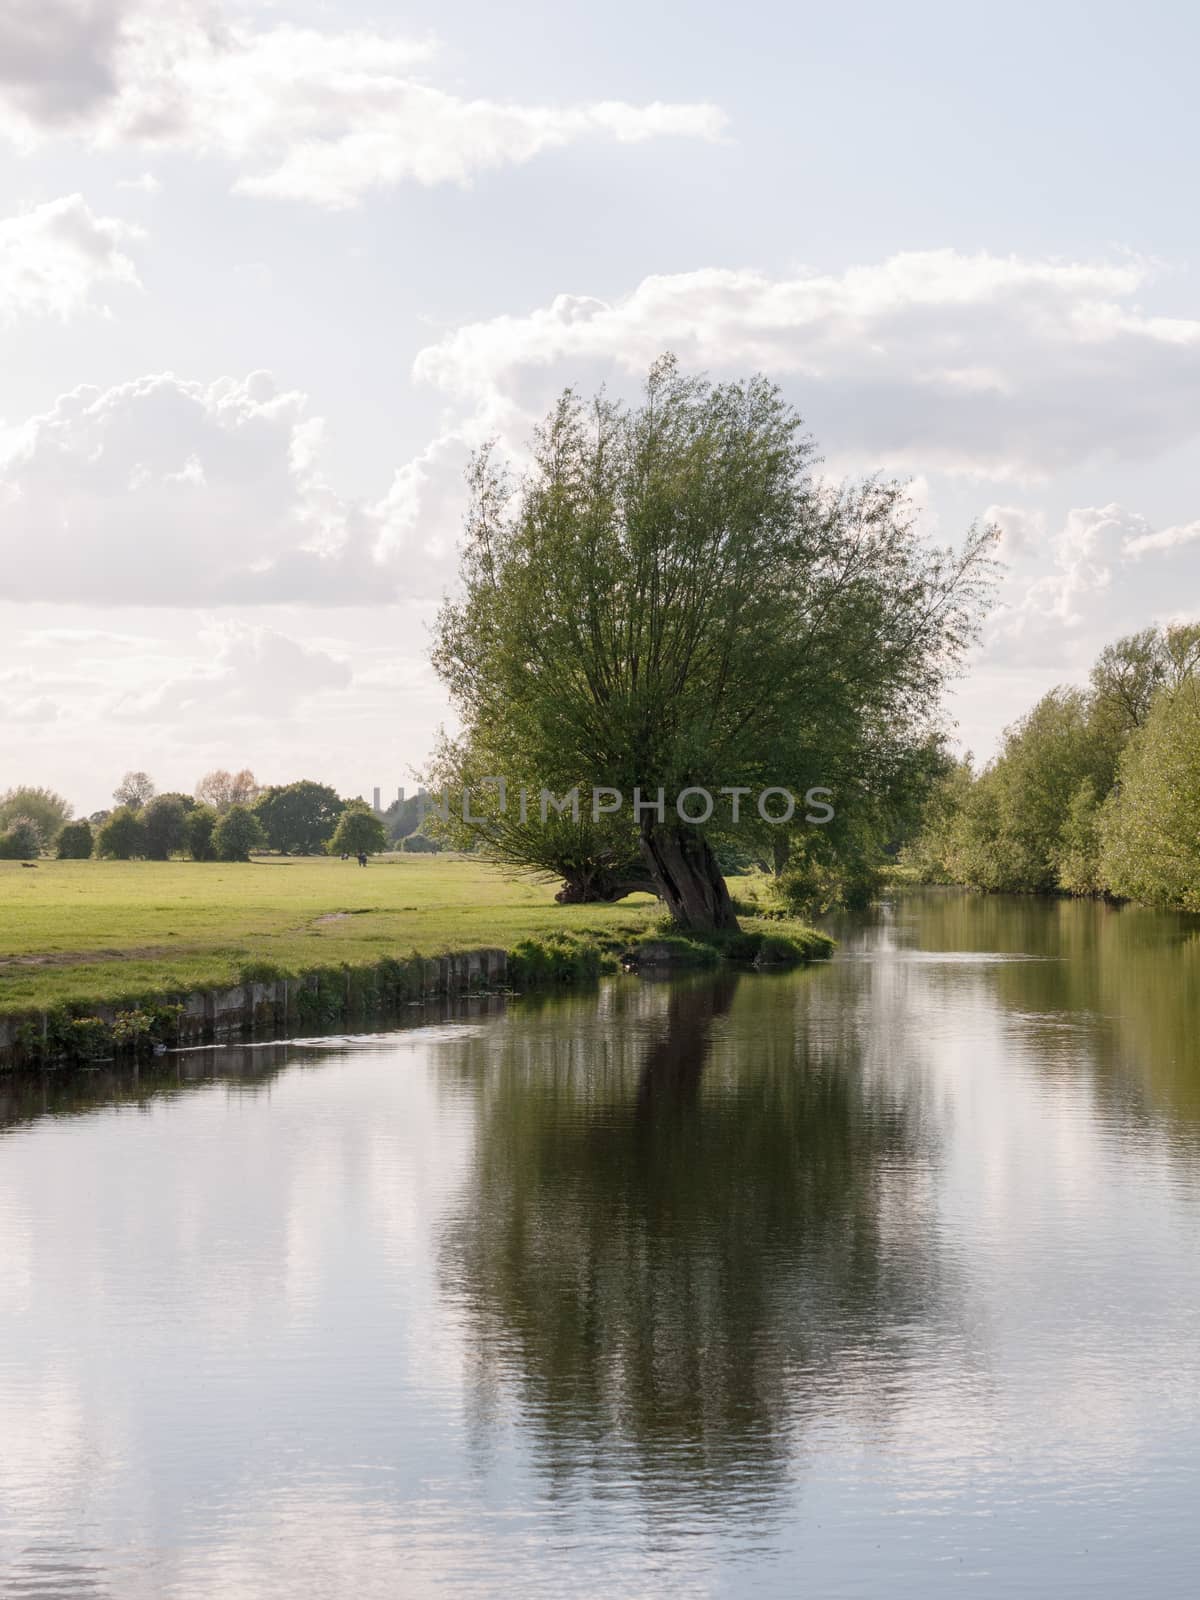 a riverside open scene outside in the country in essex england uk with no people and o boats, very lush and pretty on a late summer's afternoon gorgeous nature and tree reflecting in river